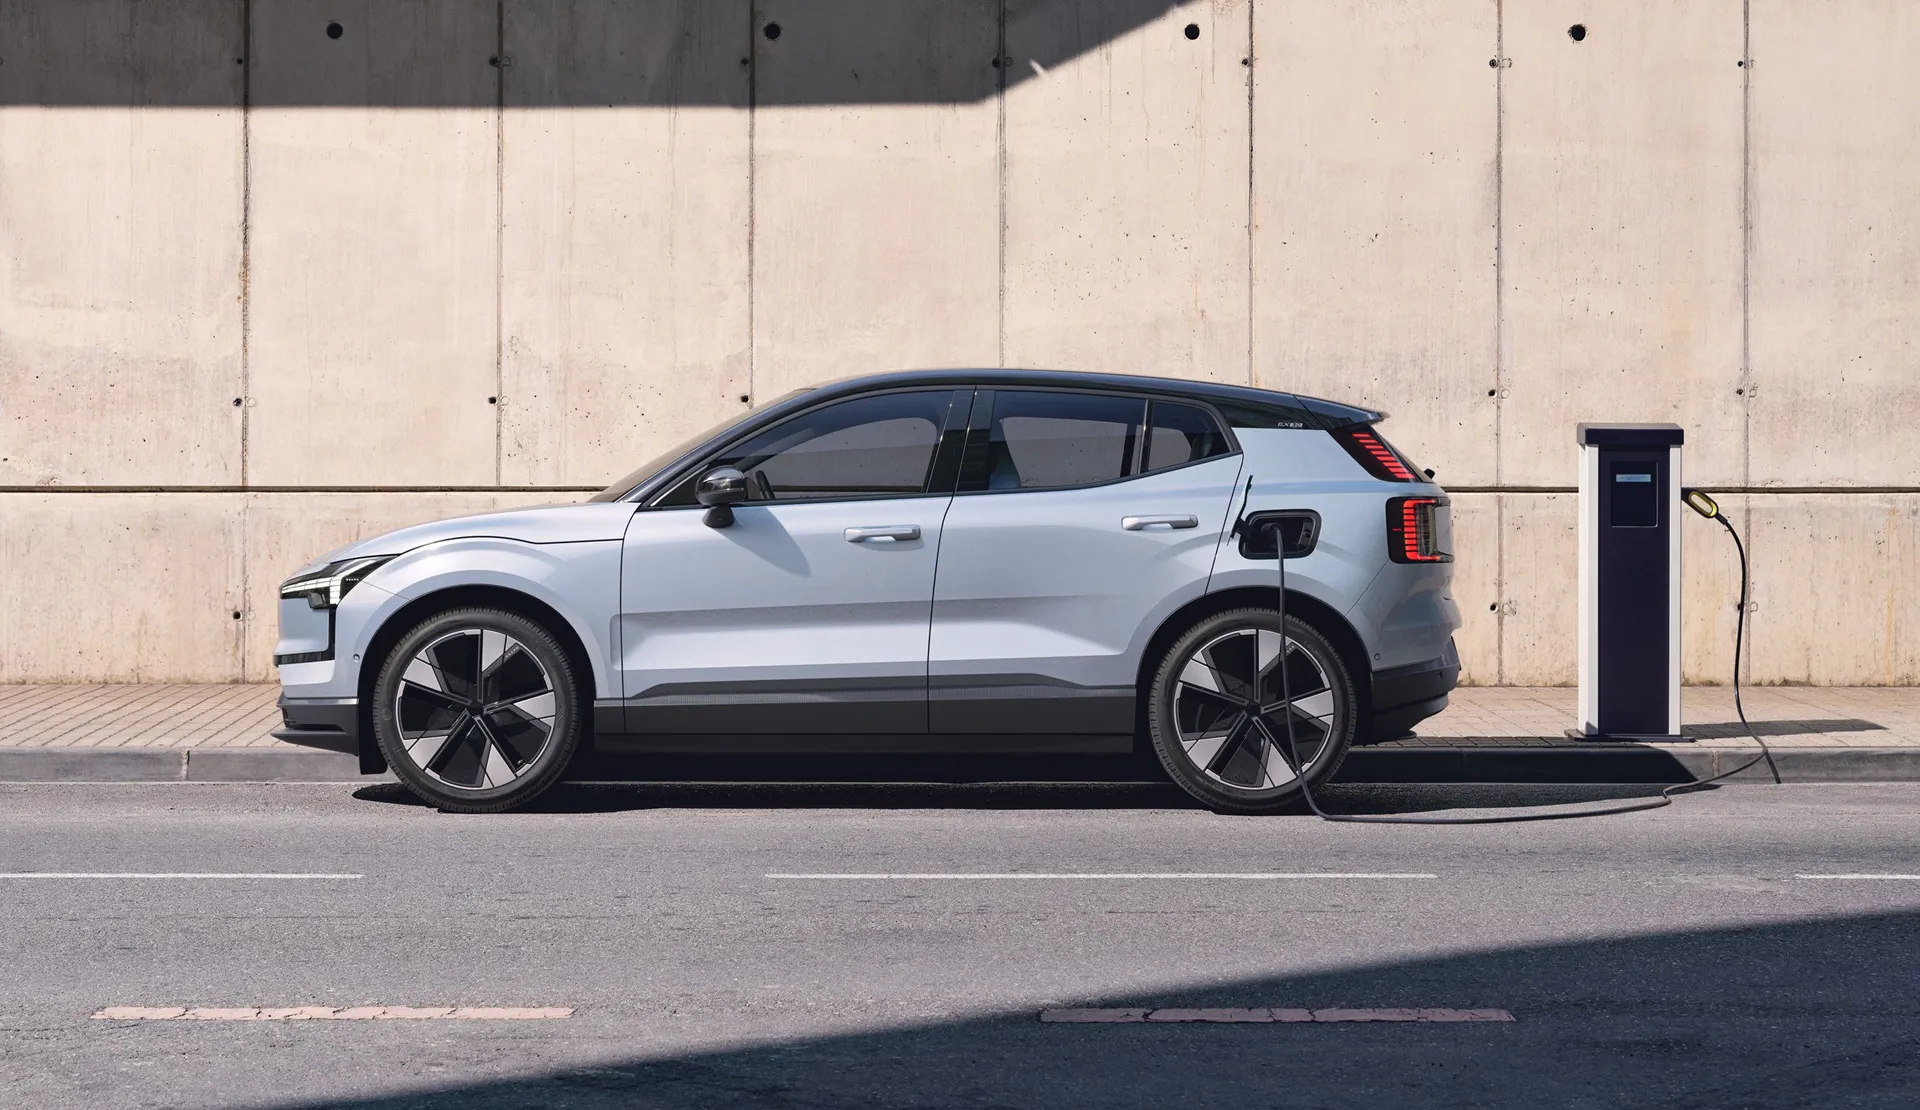 Volvo EVs will adopt Tesla charge port, get Supercharger access